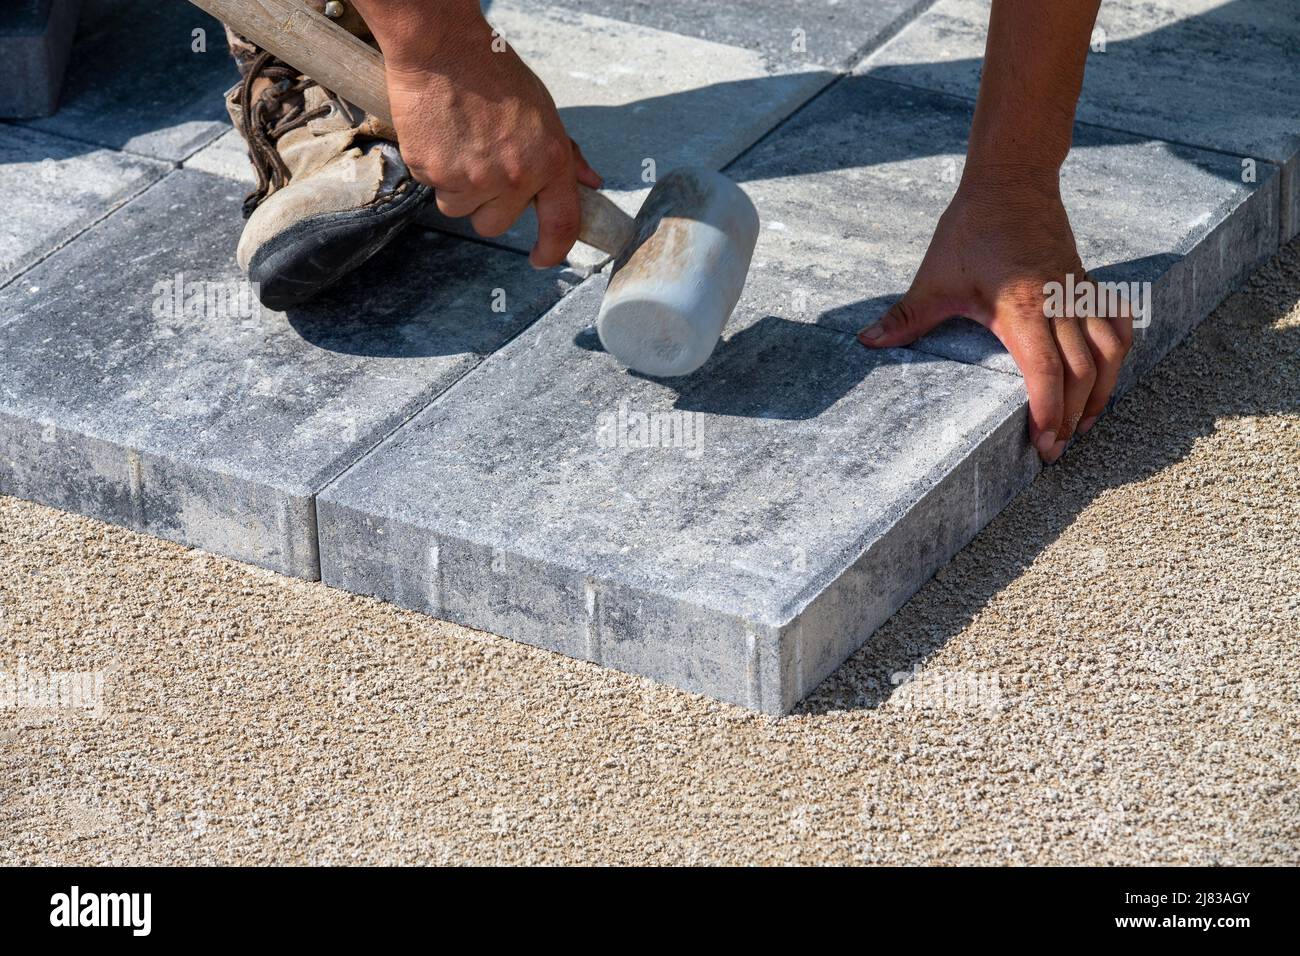 Paving stone is placed and position adjusted with a rubber hammer on a prepared sand surface Stock Photo